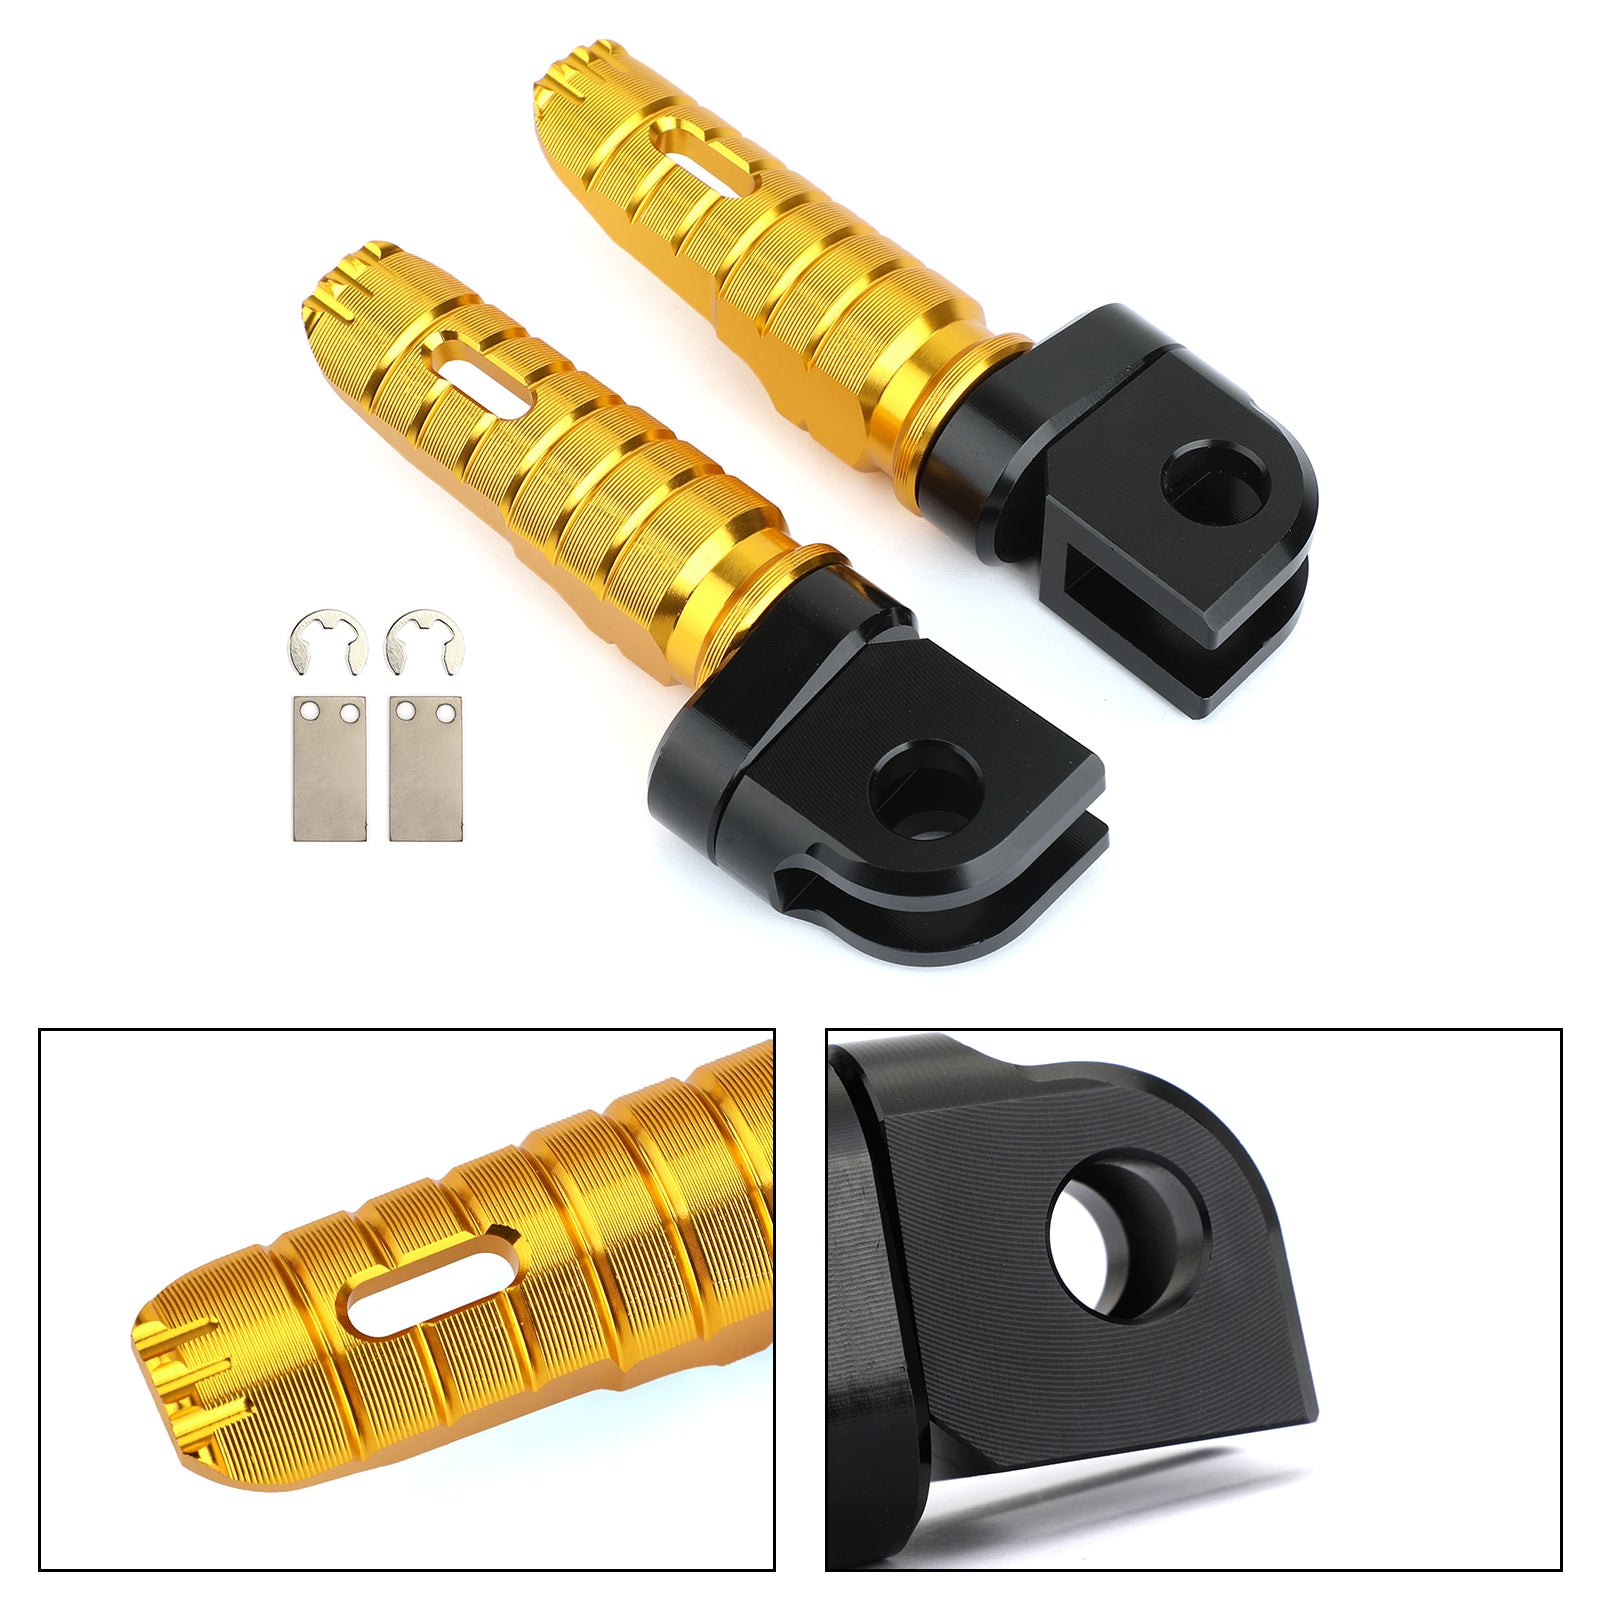 Front Footrests Foot Peg Fit For Kawasaki ZZR1400 06-16 W800 11-17 ER-6F 09-16 ZX-6R 09-17 Z650 17-20 Gold